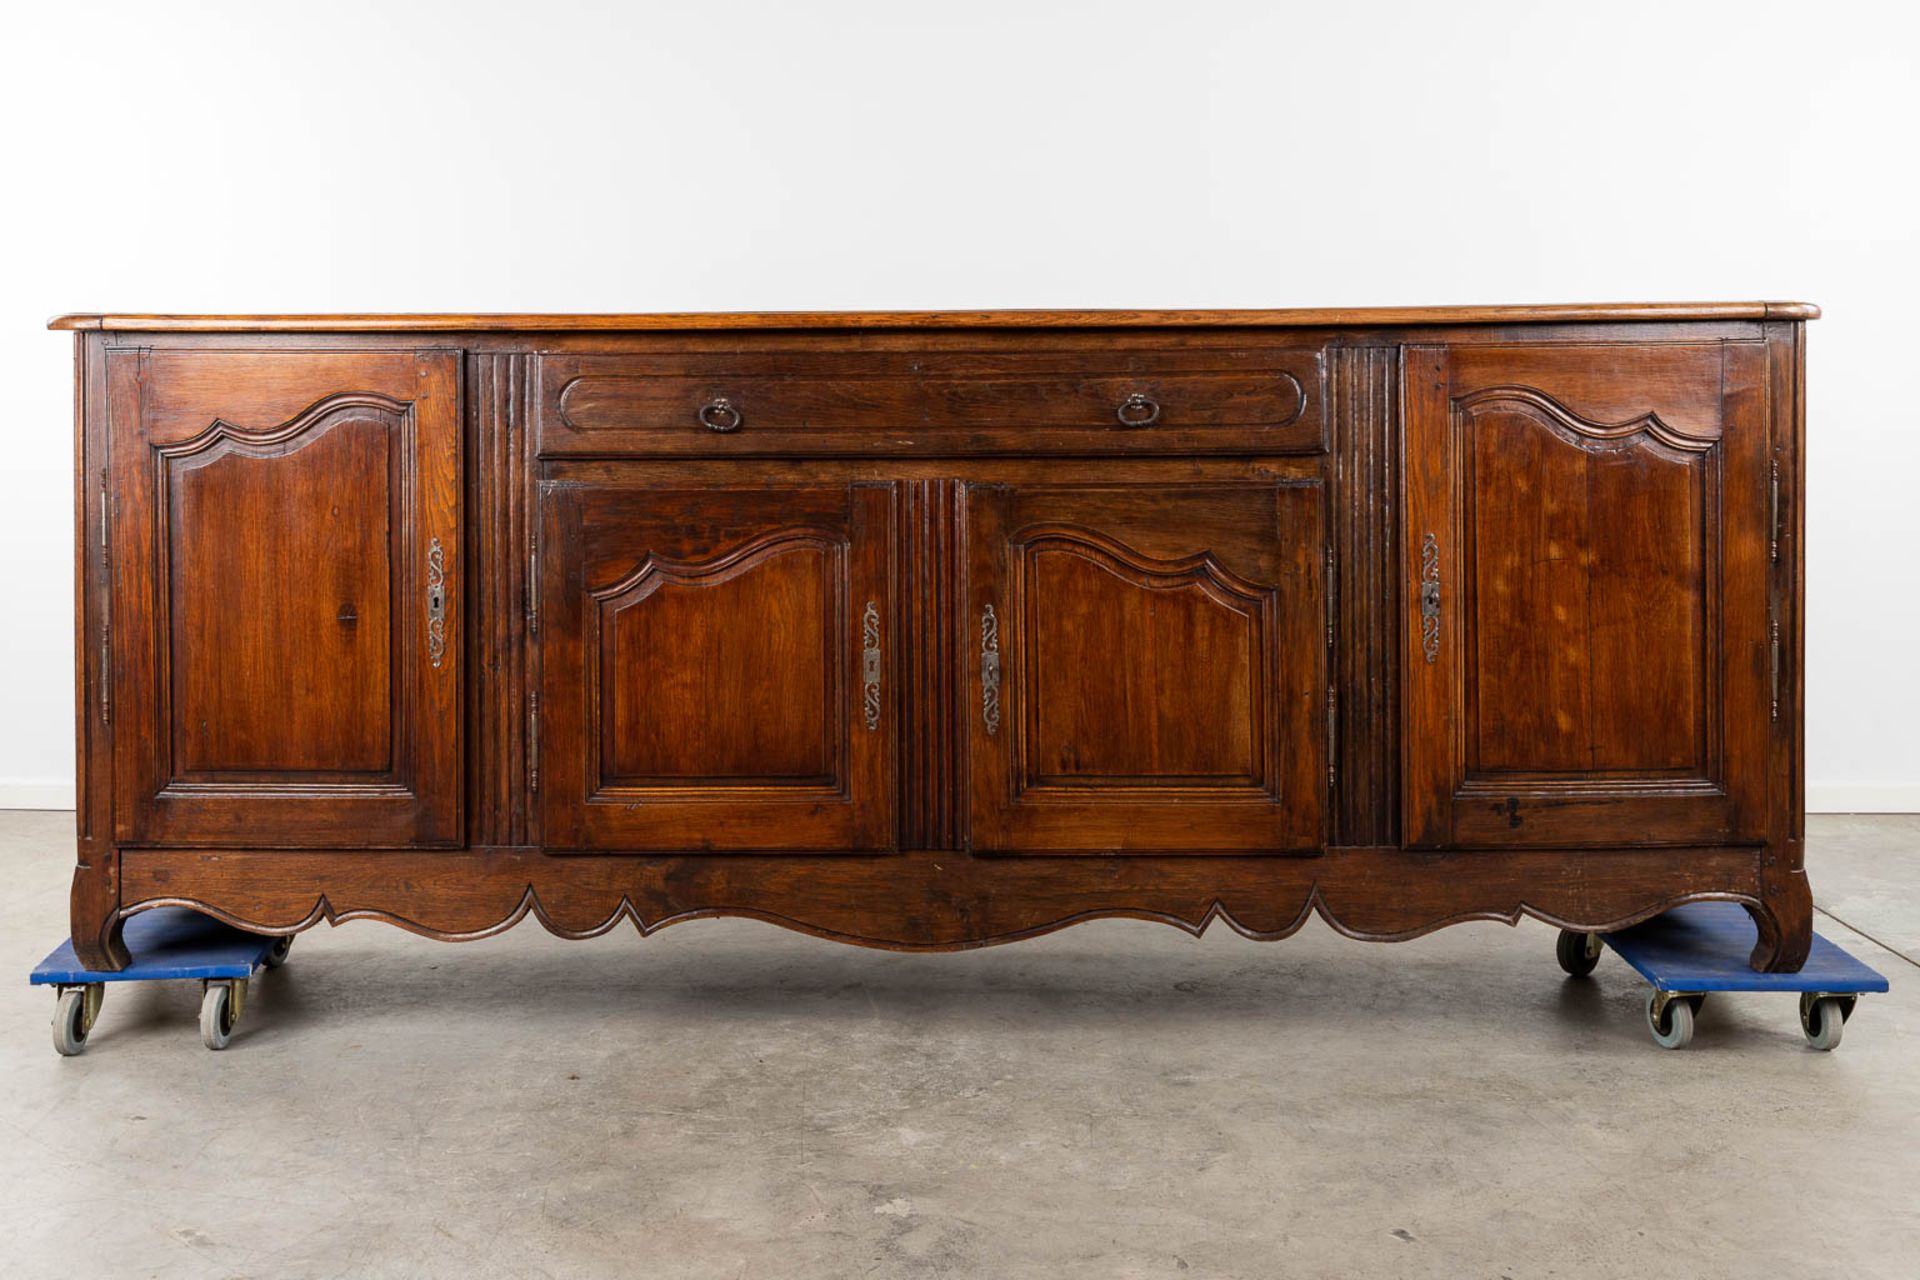 An antique sideboard with 4 doors and a drawer. France, 18th C. (D:64 x W:281 x H:105 cm) - Image 3 of 12